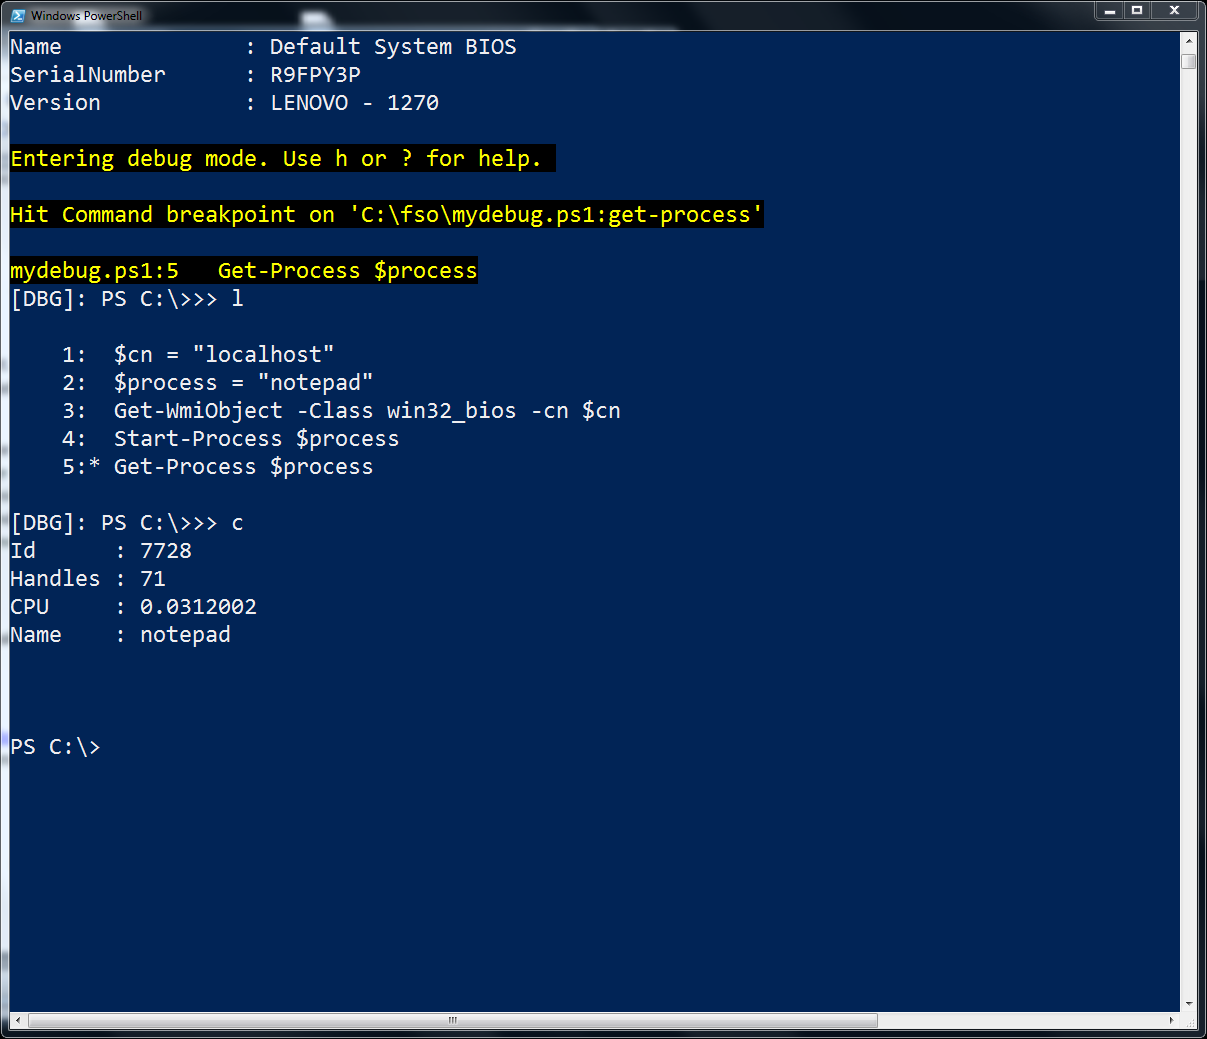 Open Windows PowerShell as an administrator.
Type Repair-Volume -DriveLetter C -Scan (replace C with the drive letter you want to scan) and press Enter.